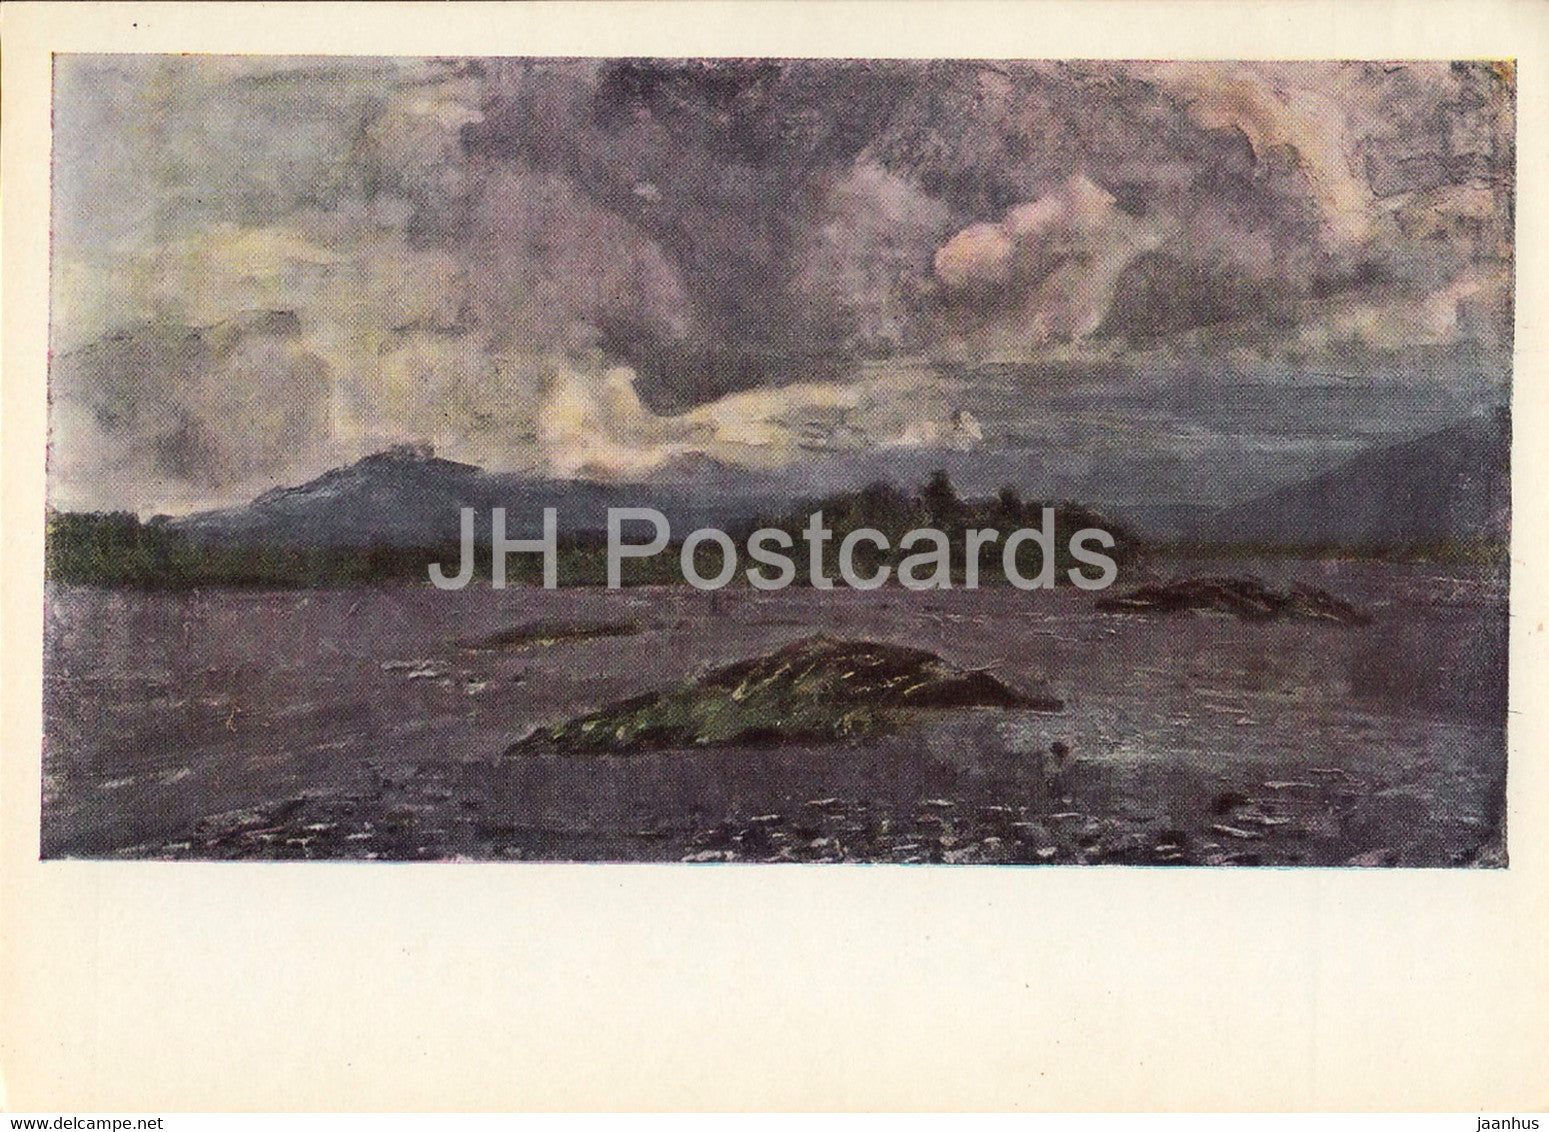 painting by A. Stroganov - The Flood - Mongolian art - 1966 - Russia USSR - unused - JH Postcards